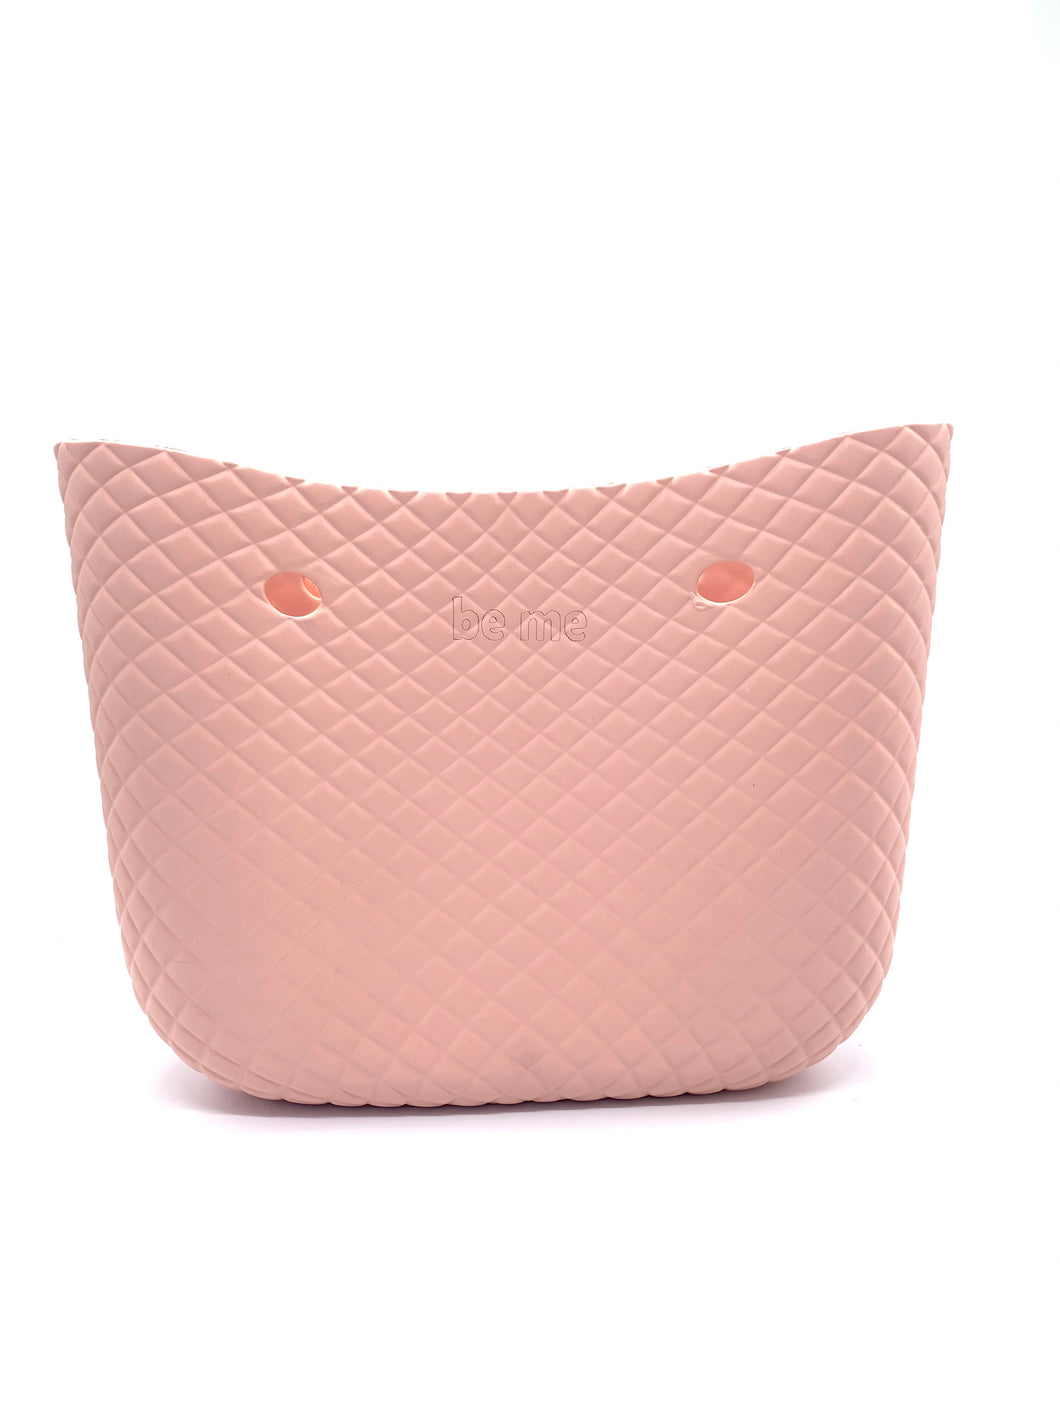 Classic Body - Waffle Style Be Me Bag - Baby Rose